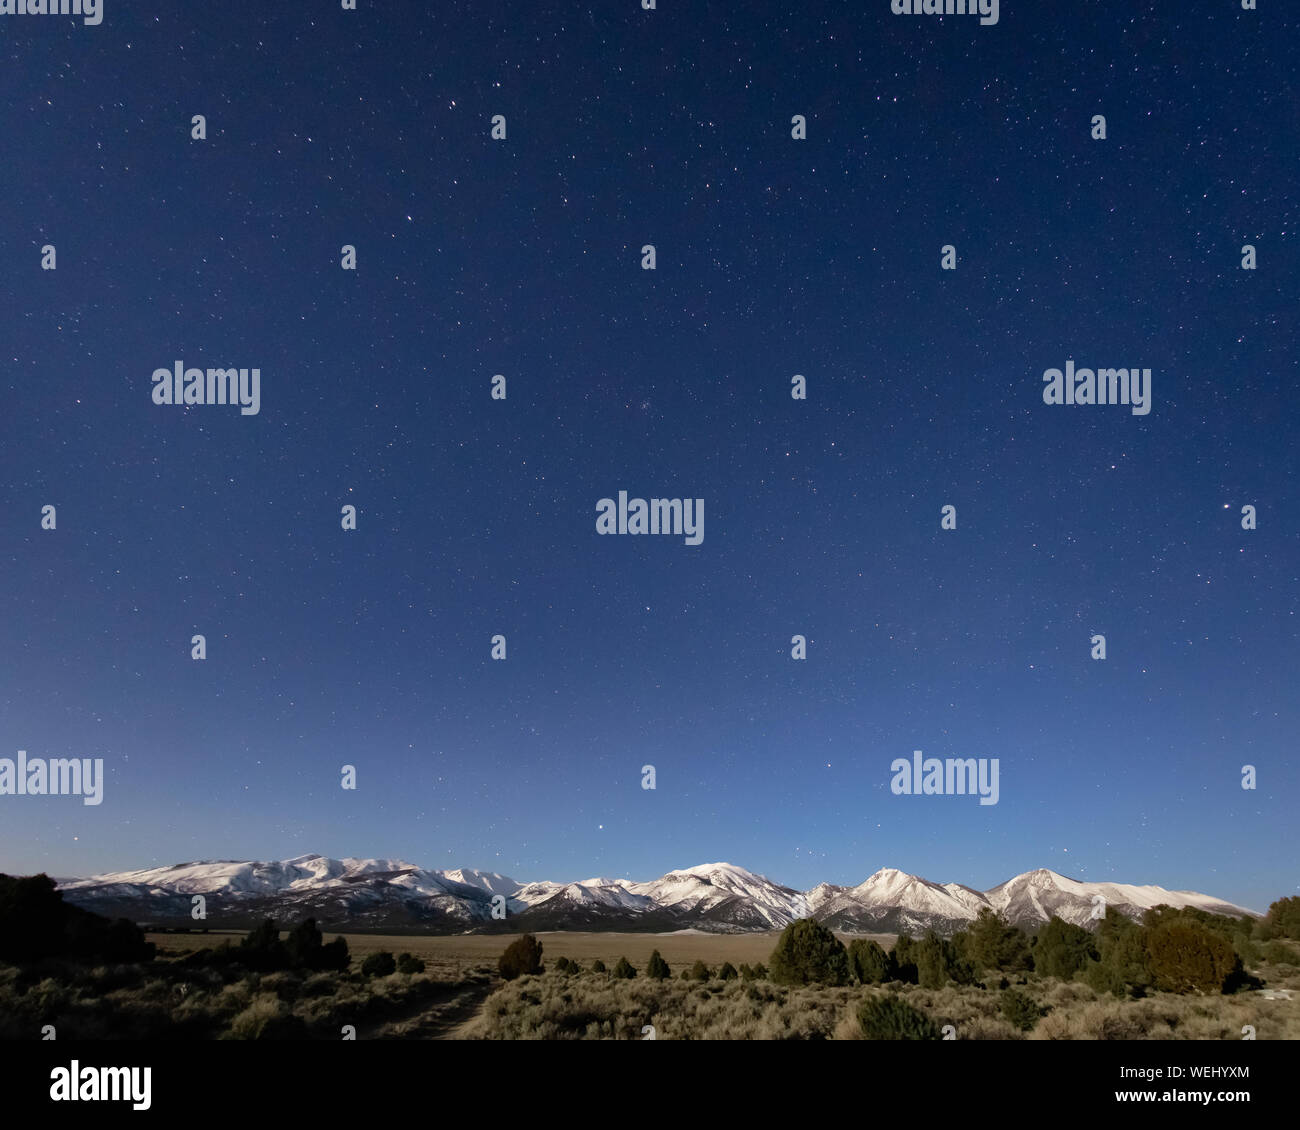 USA, Nevada, Lyon County, Sweetwater Range: Starry Skies above Snow Capped mountains on a bright full moon night. Views of Wheeler Peak, Mt Patterson, Stock Photo